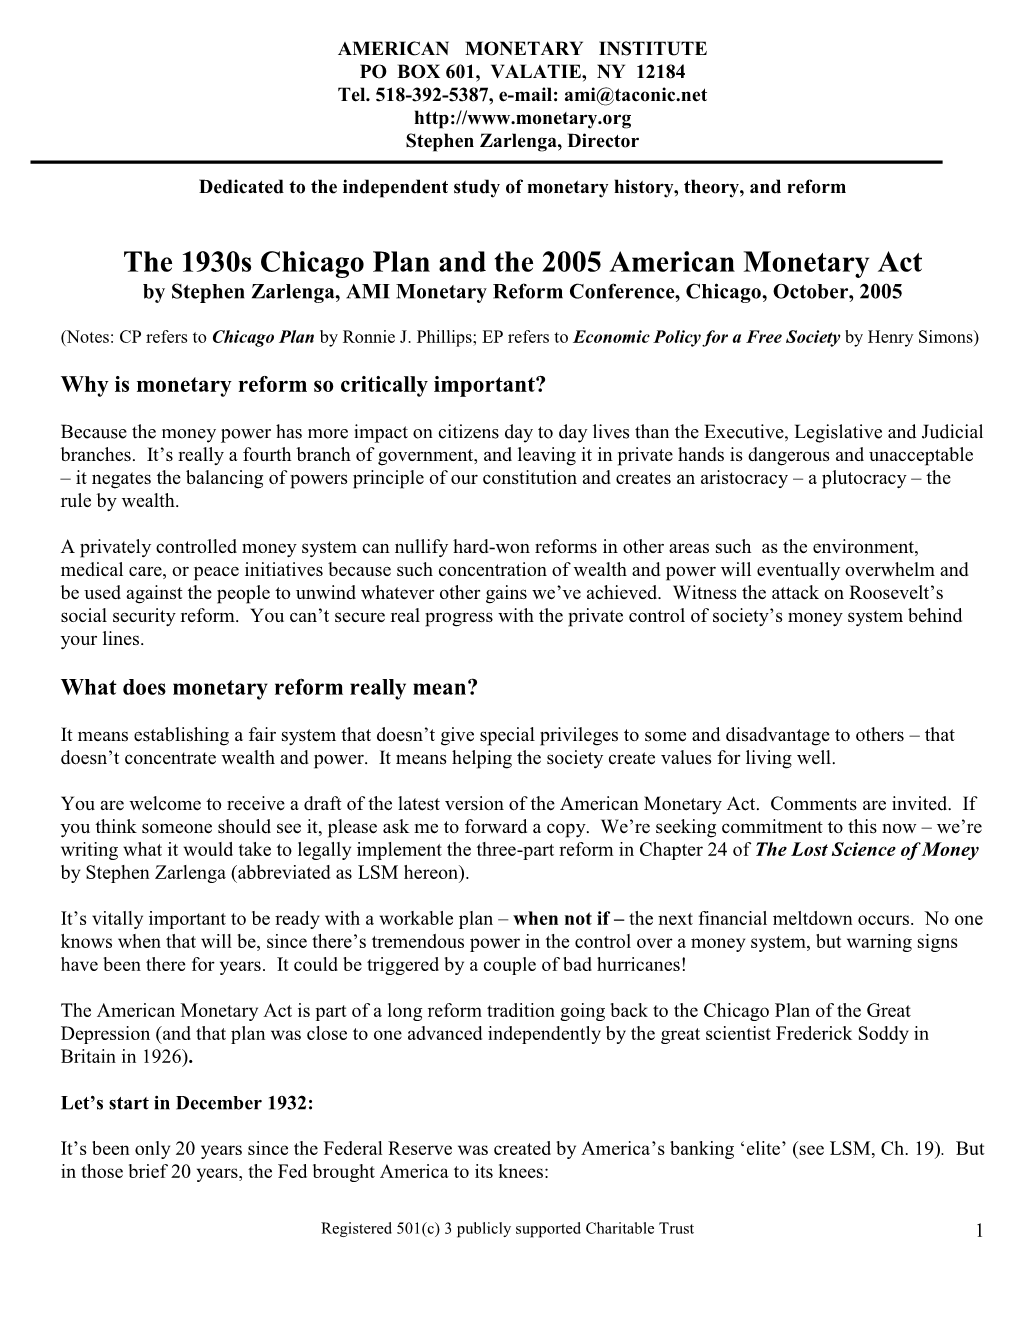 Chicago Plan and the 2005 American Monetary Act by Stephen Zarlenga, AMI Monetary Reform Conference, Chicago, October, 2005